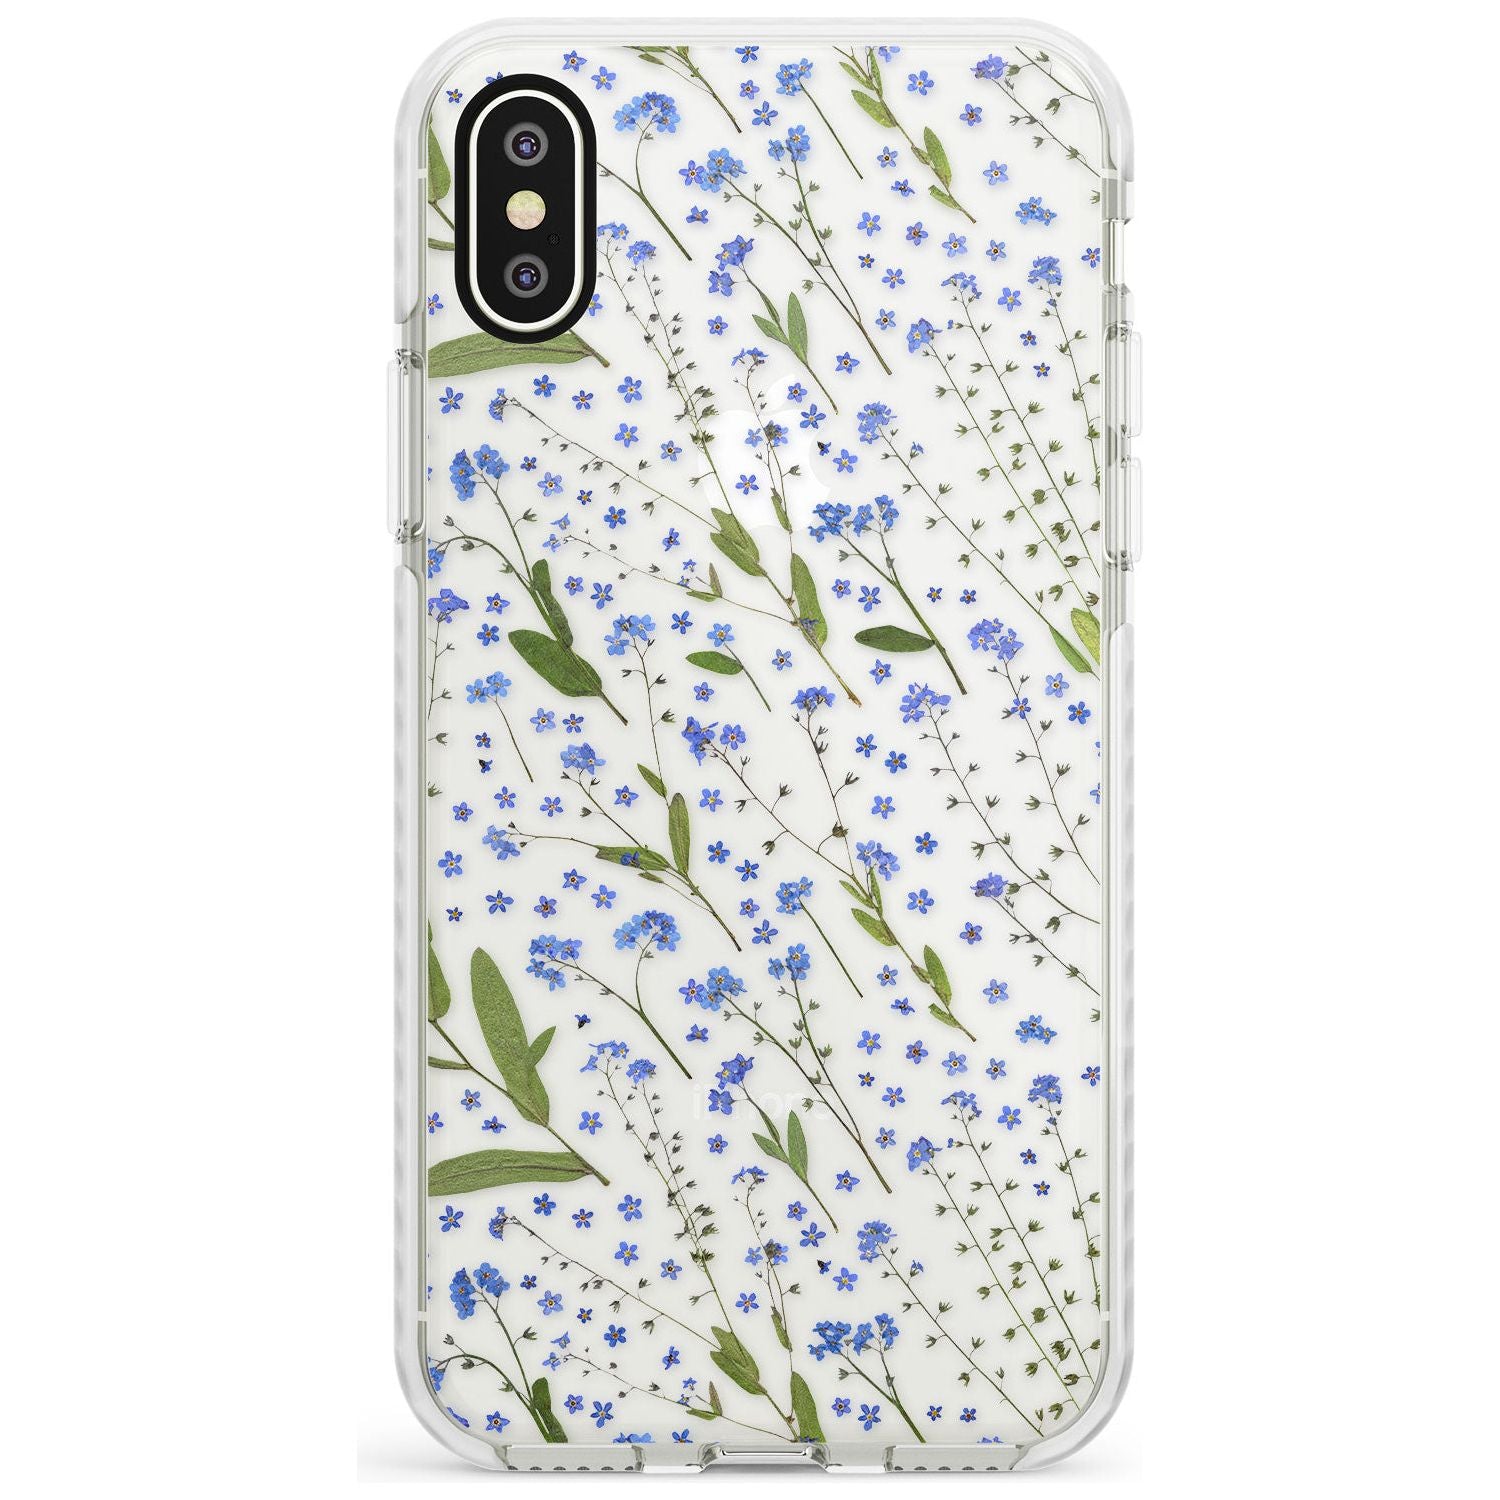 Blue Wild Flower Design Impact Phone Case for iPhone X XS Max XR